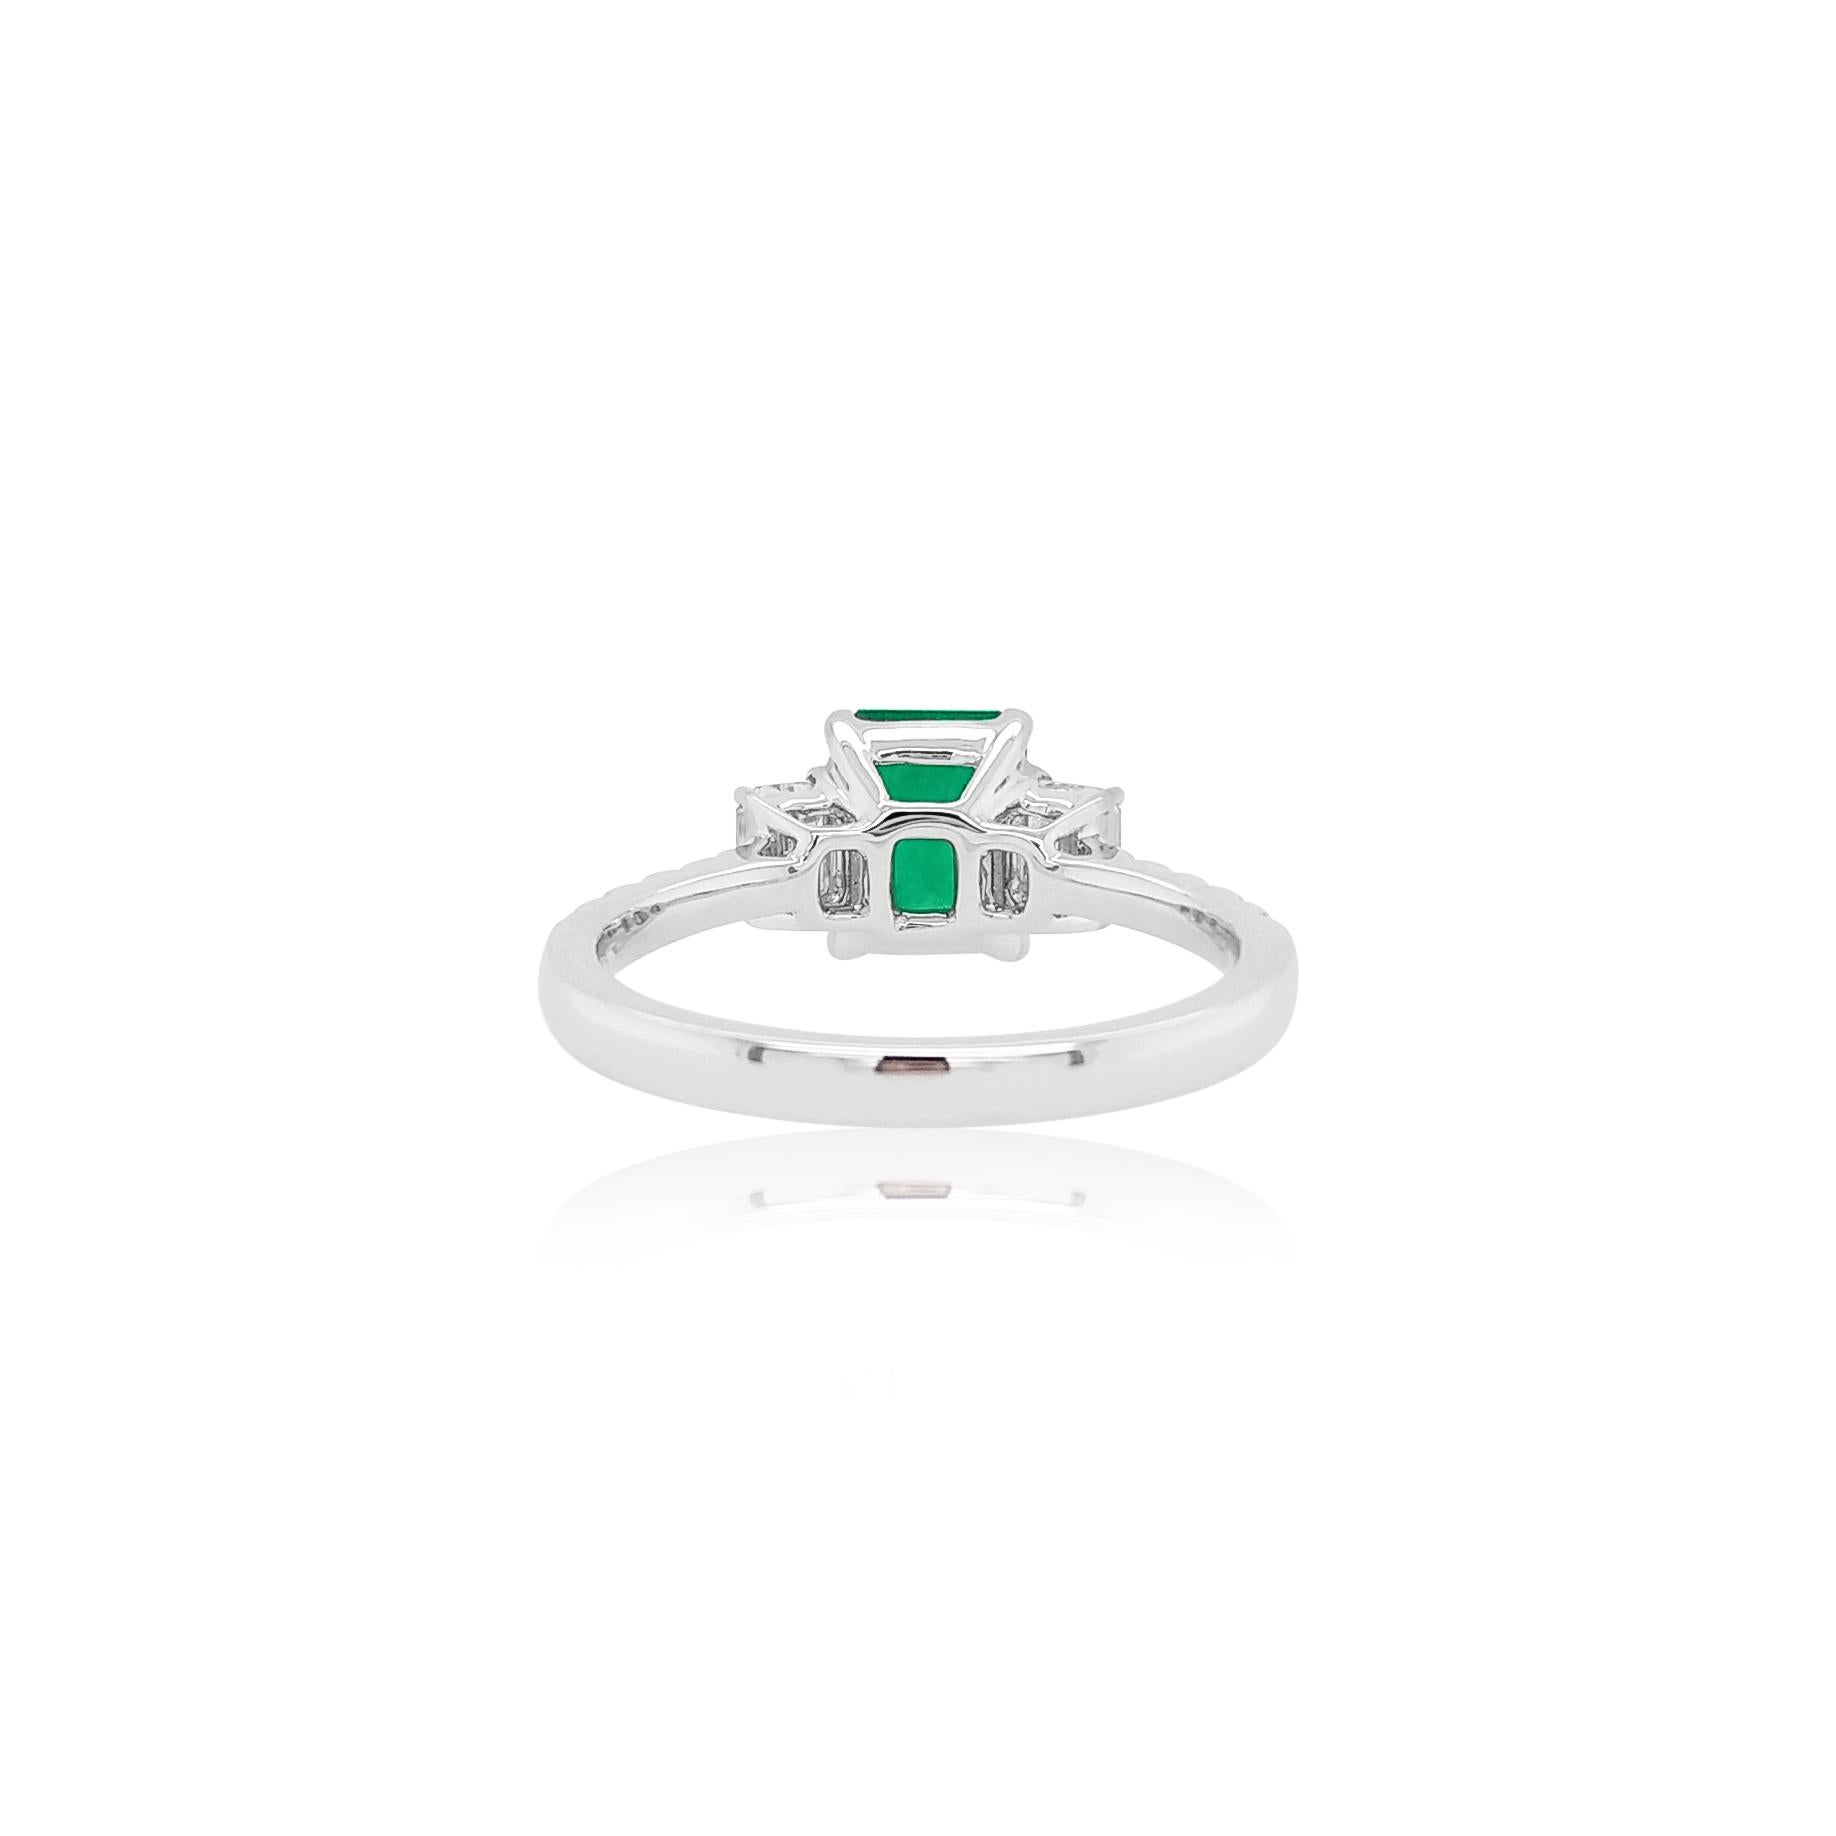 This delicate ring features a exceptional Emerald-cut Colombian Emerald at the forefront of its design. The spectacular hues of the Emerald are perfectly accentuated by the 18 Karat White Gold setting and elegant Emerald-cut White diamond on its